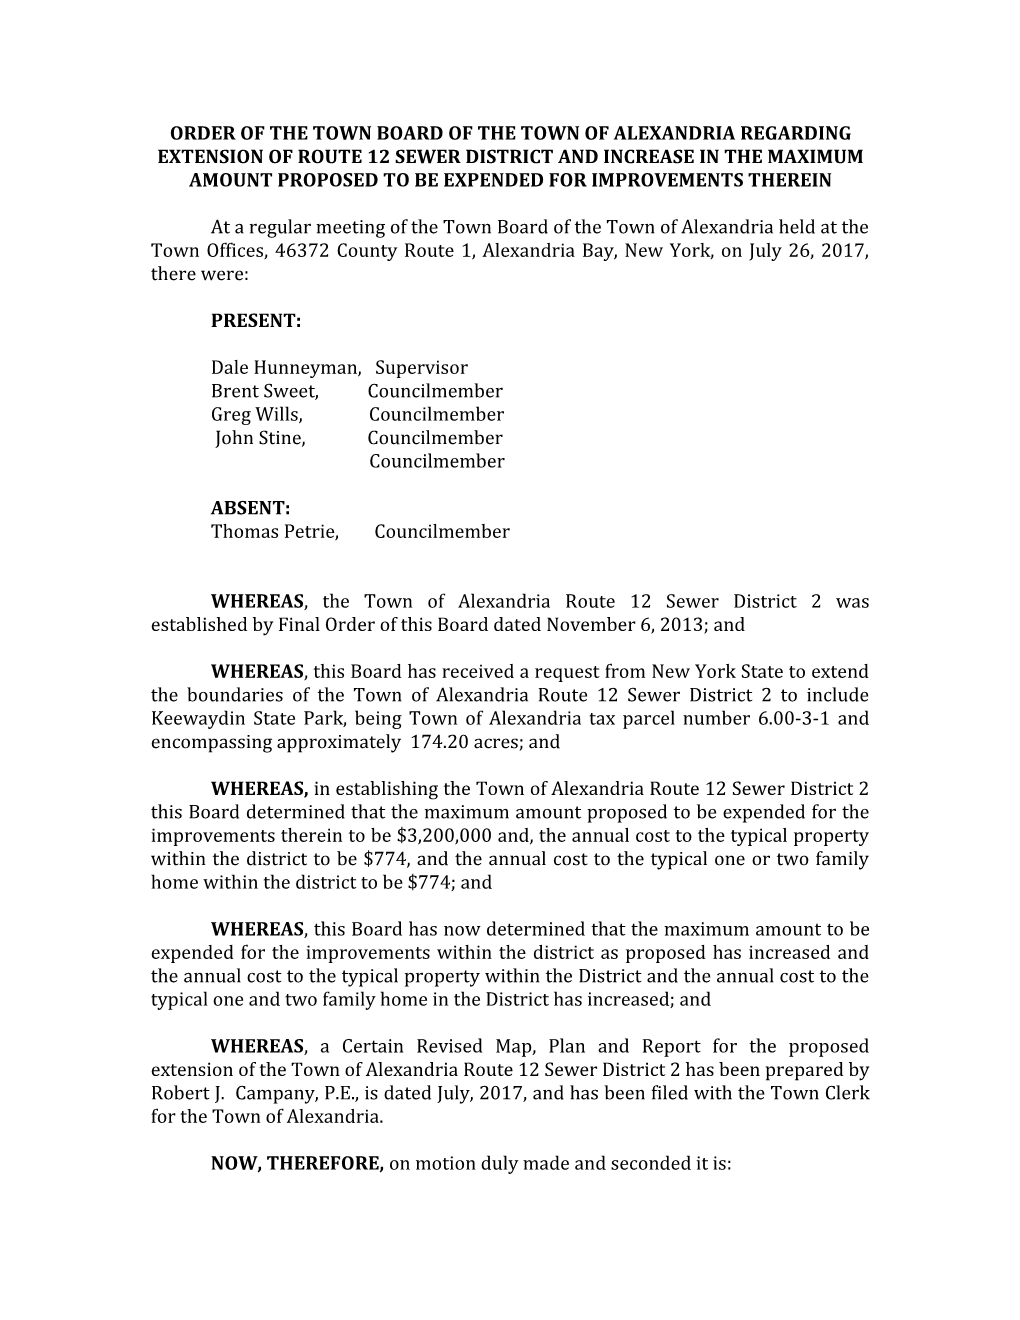 Order of the Town Board of the Town of Alexandria Regarding Extension of Route 12 Sewer